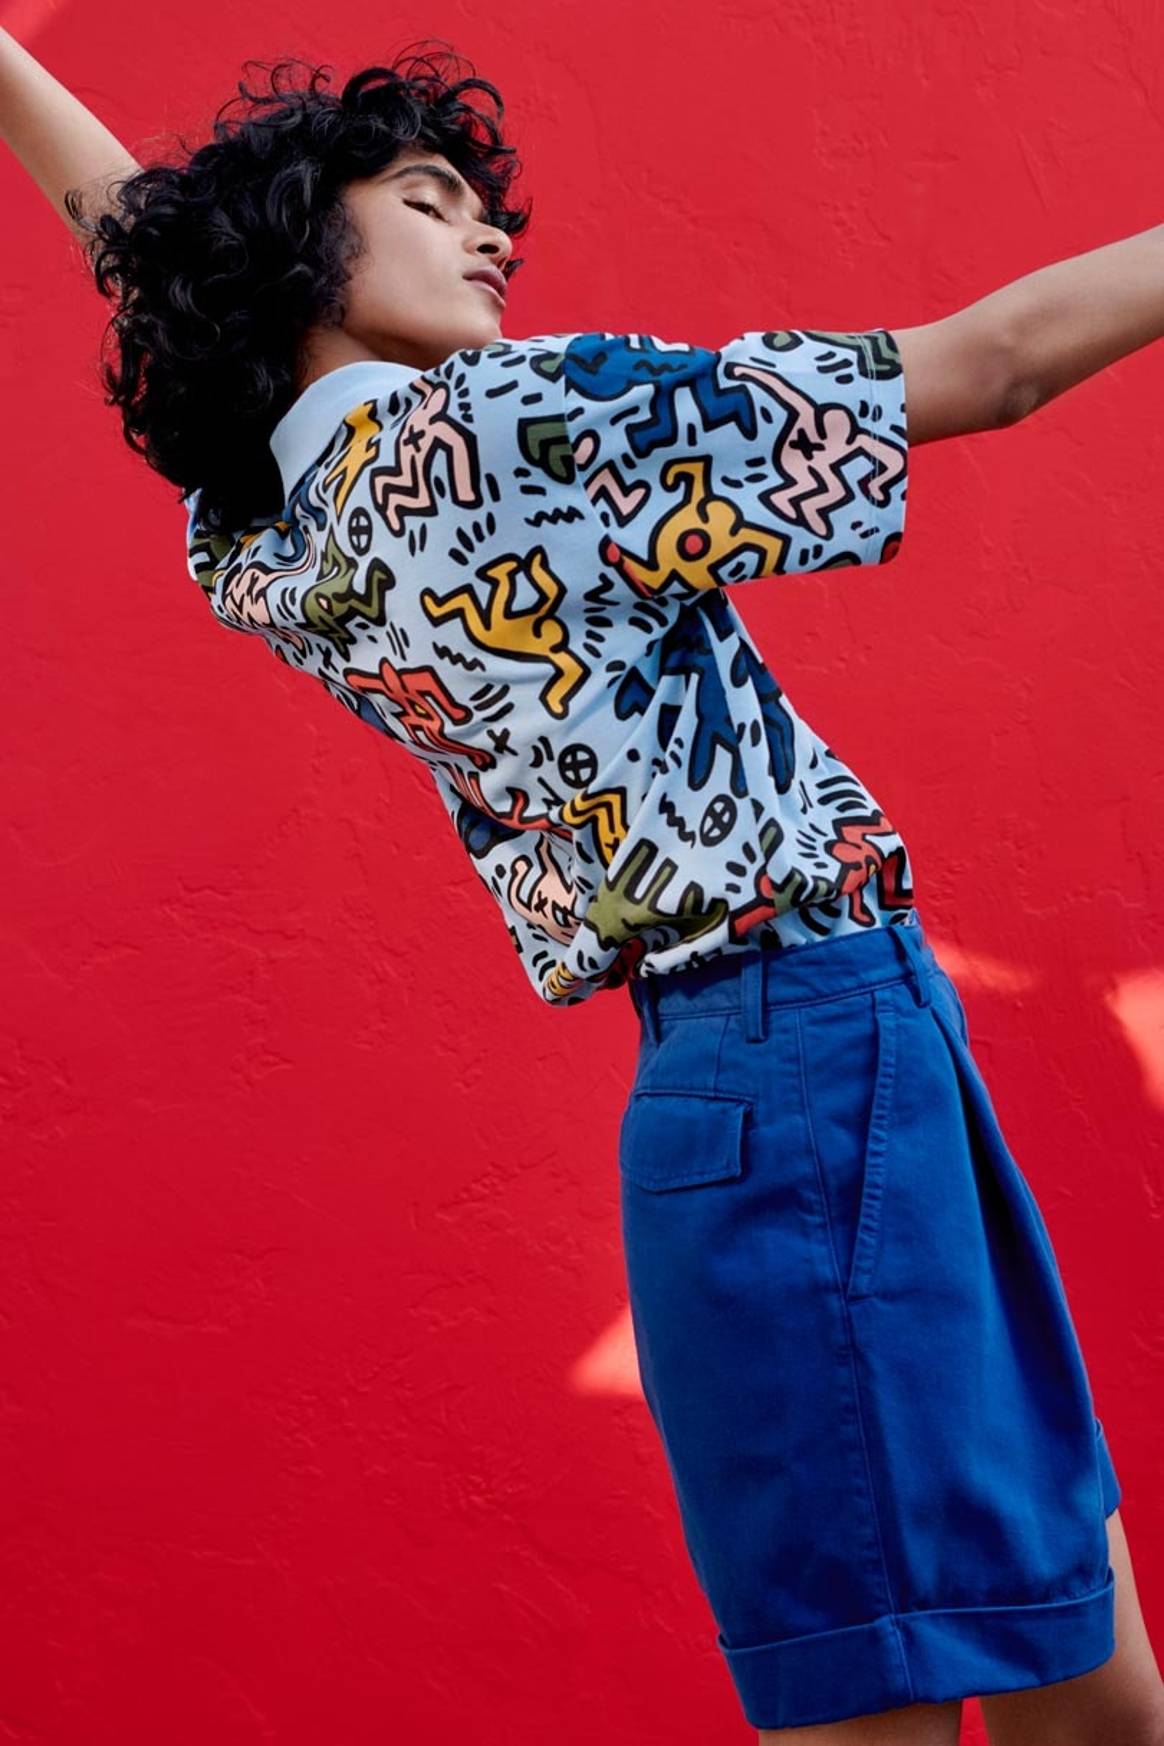 In Pictures: Lacoste x Keith Haring